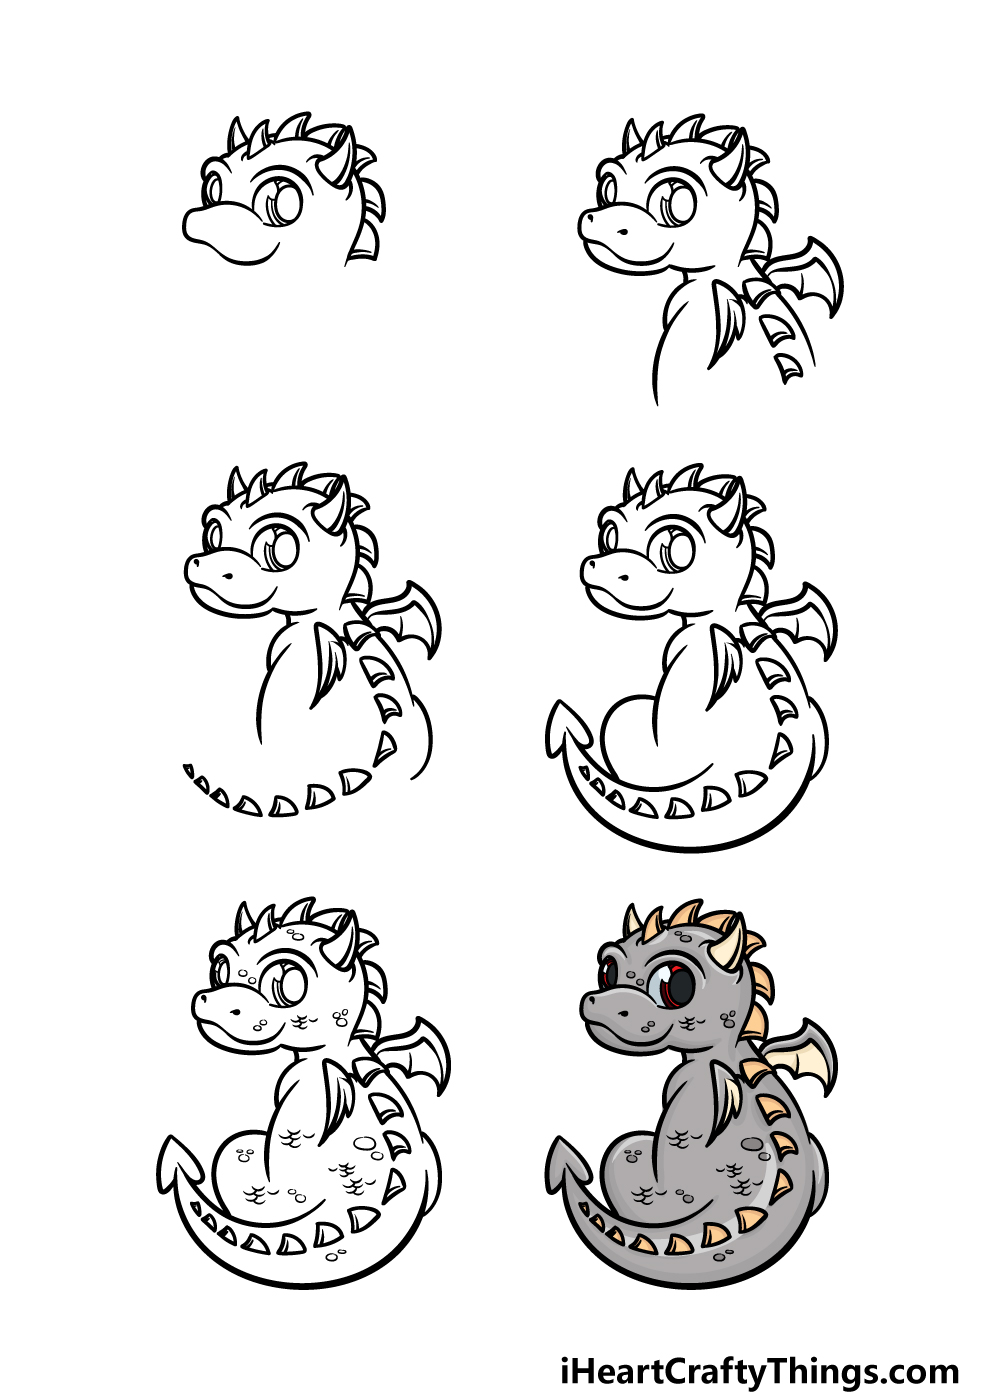 how to draw a baby dragon in 6 steps